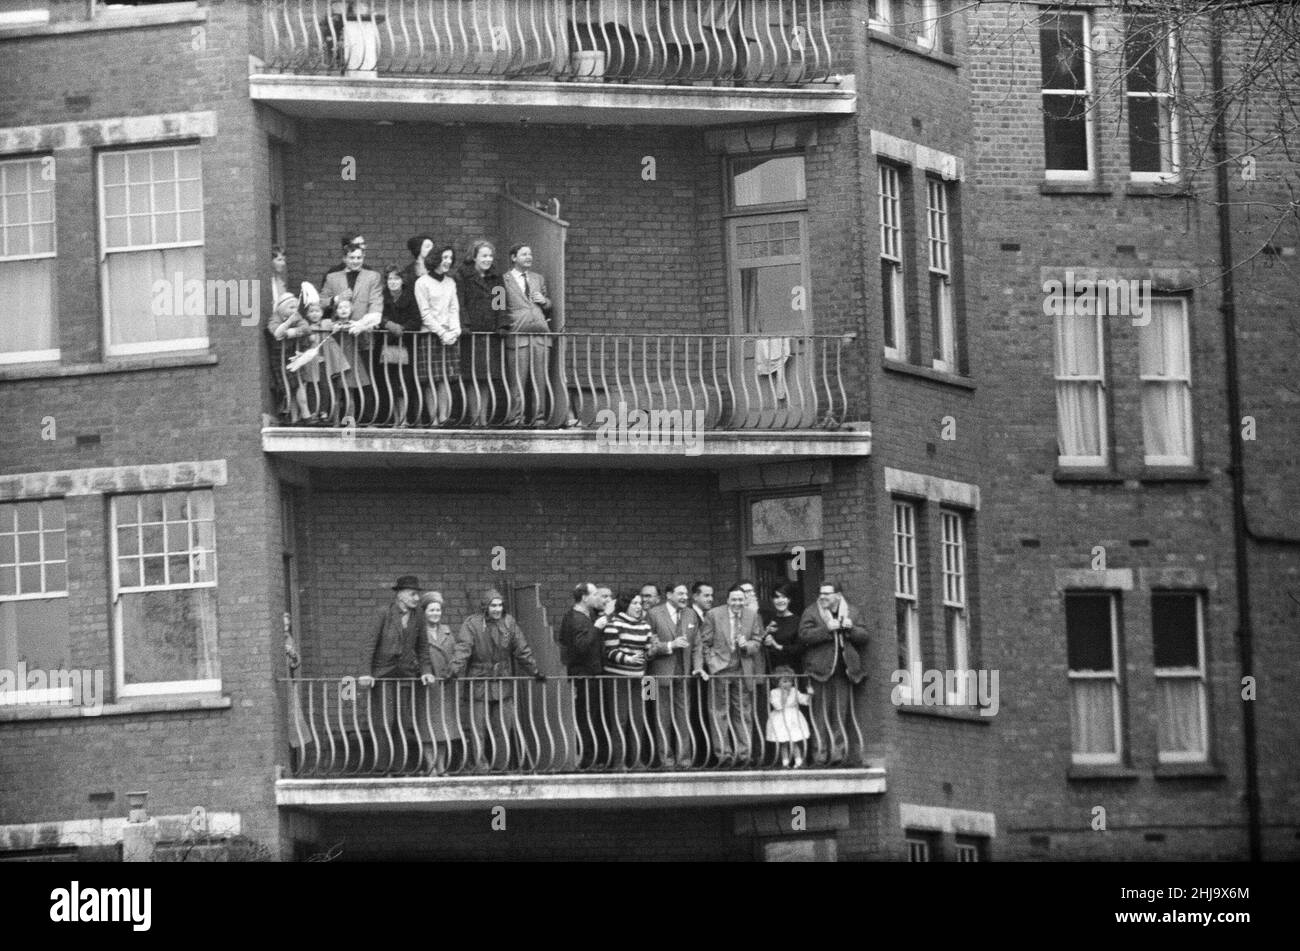 Oxford verses Cambridge Boat Race, on The River Thames, London, 23rd March 1963.   Onlookers enjoy the day from a residence in the Barnes area.  The 109th Boat Race took place on 23 March 1963. Held annually, the event is a side-by-side rowing race between crews from the Universities of Oxford and Cambridge along the River Thames. The race, umpired by Gerald Ellison, the Bishop of Chester, was won by Oxford with a winning margin of five lengths.  Picture taken 23rd March 1963 Stock Photo